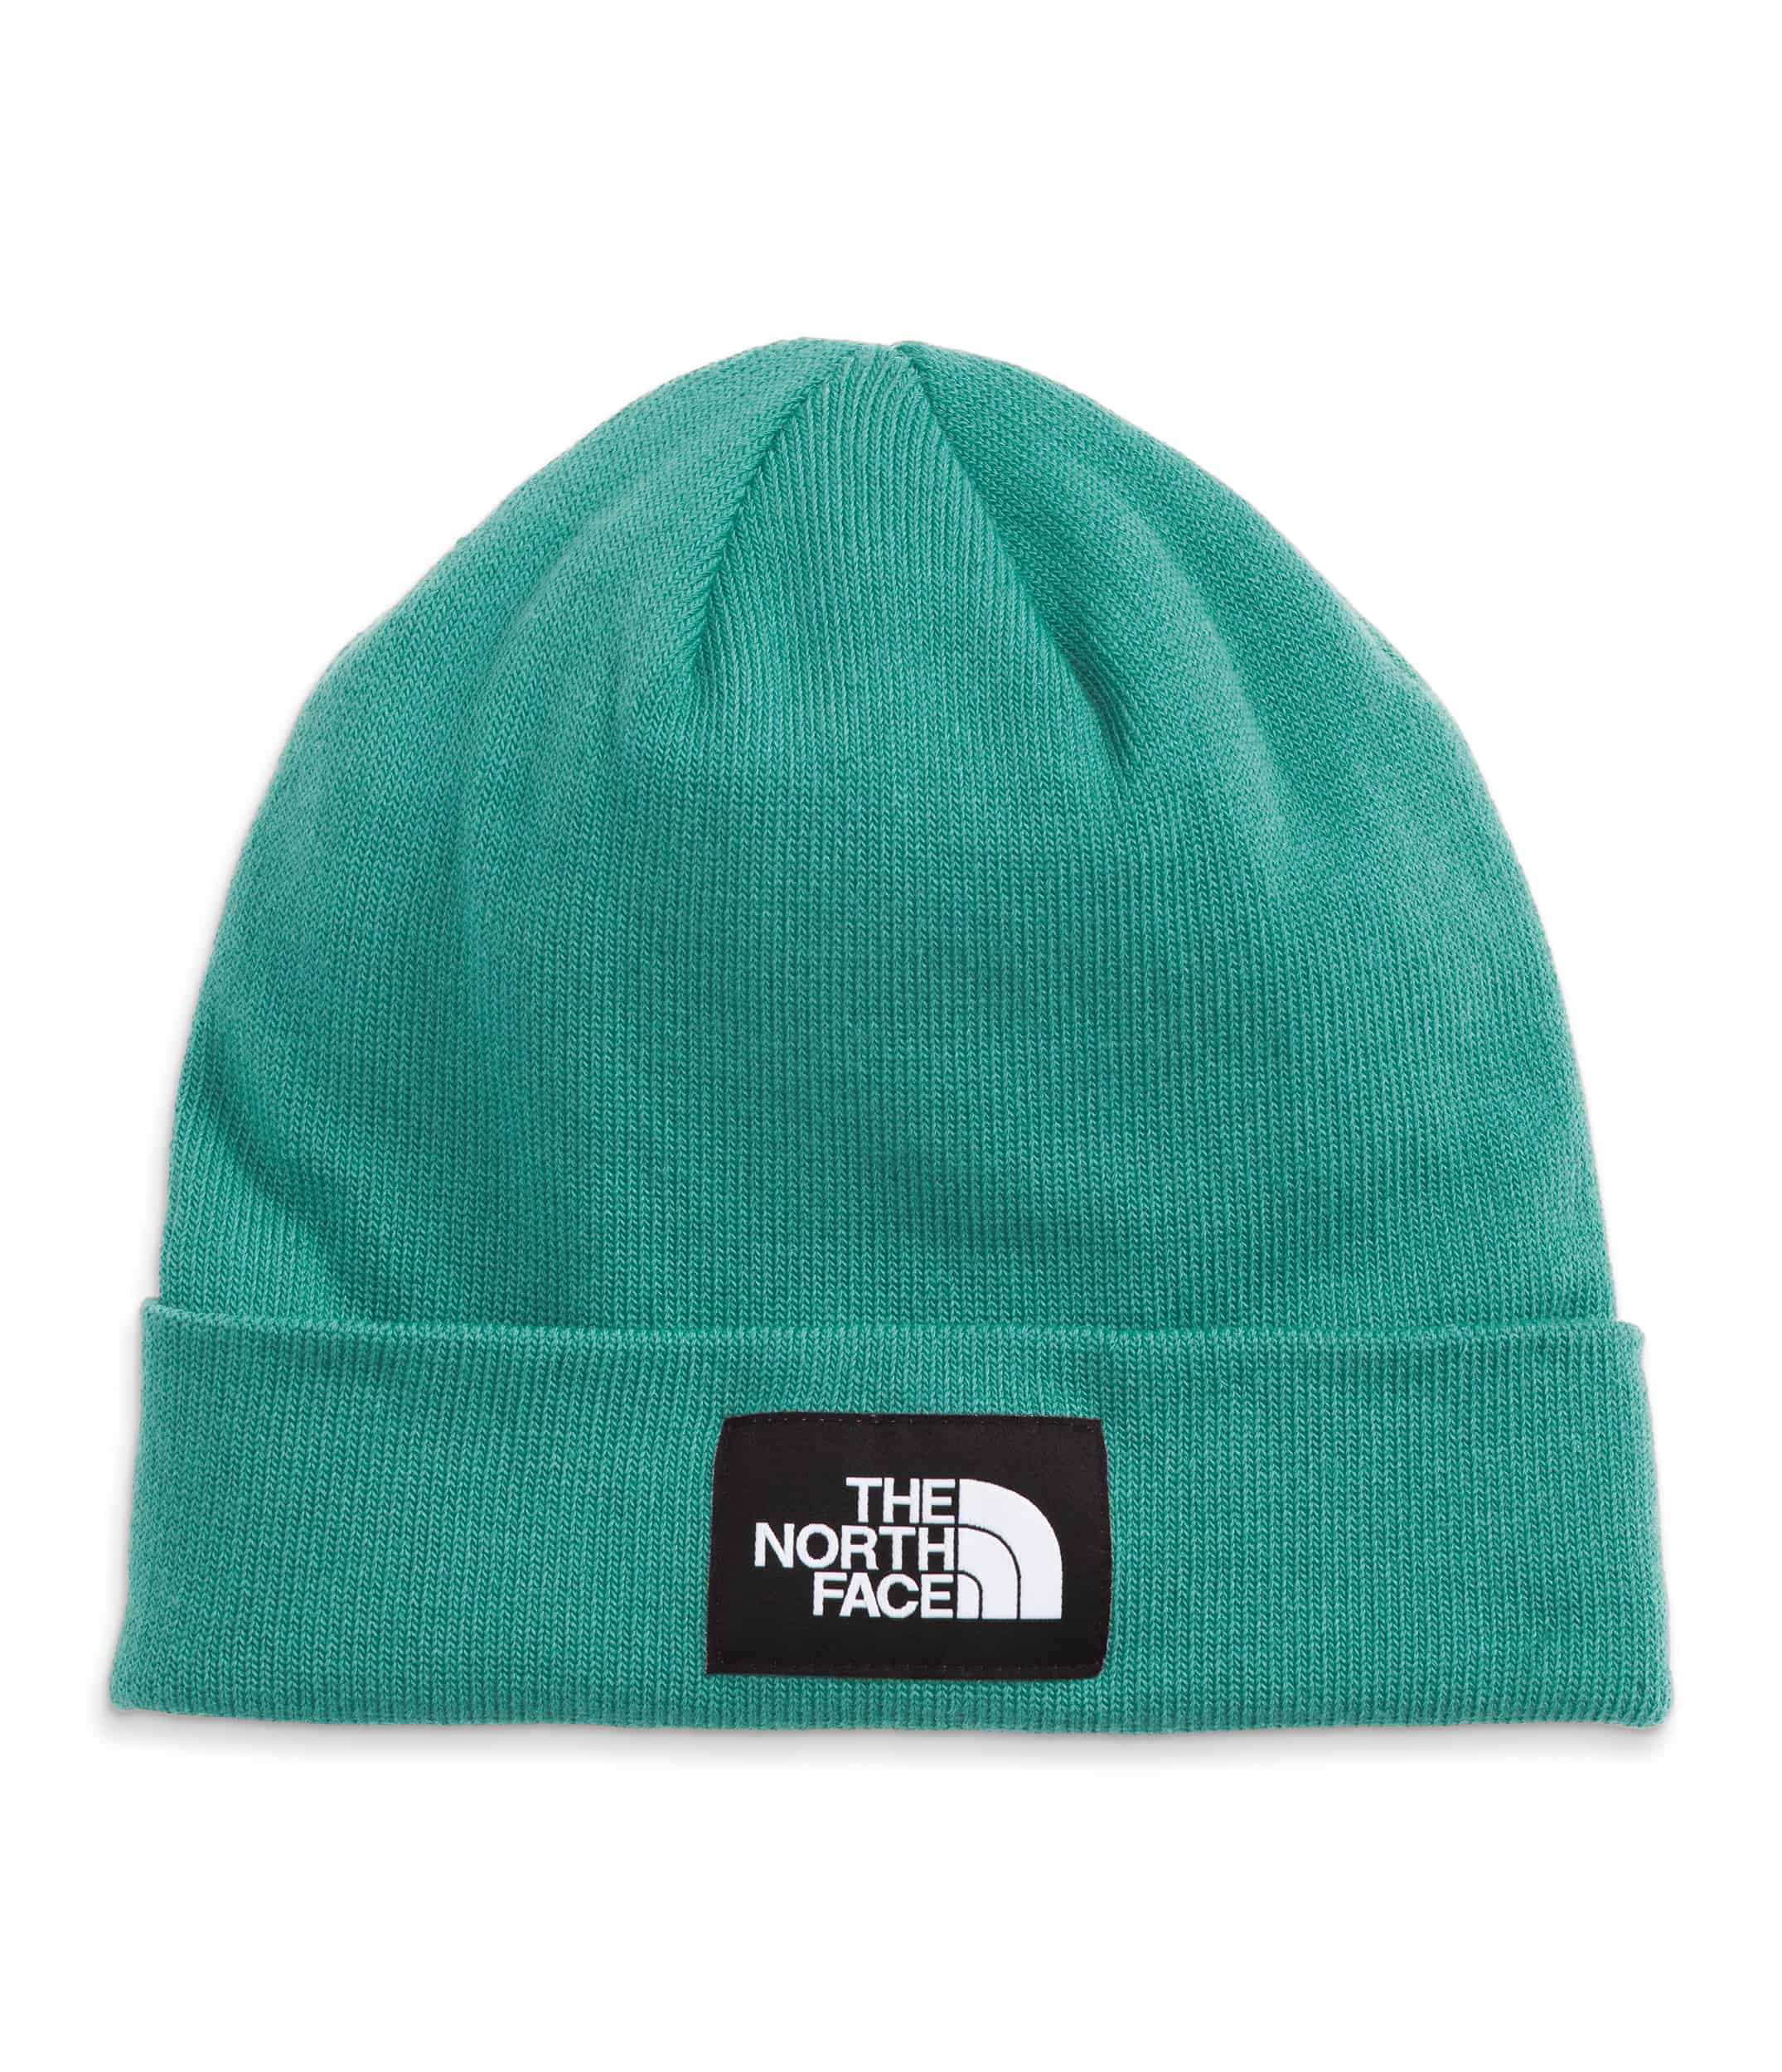 Prairie Summit Shop - The North Face Dock Worker Recycled Beanie